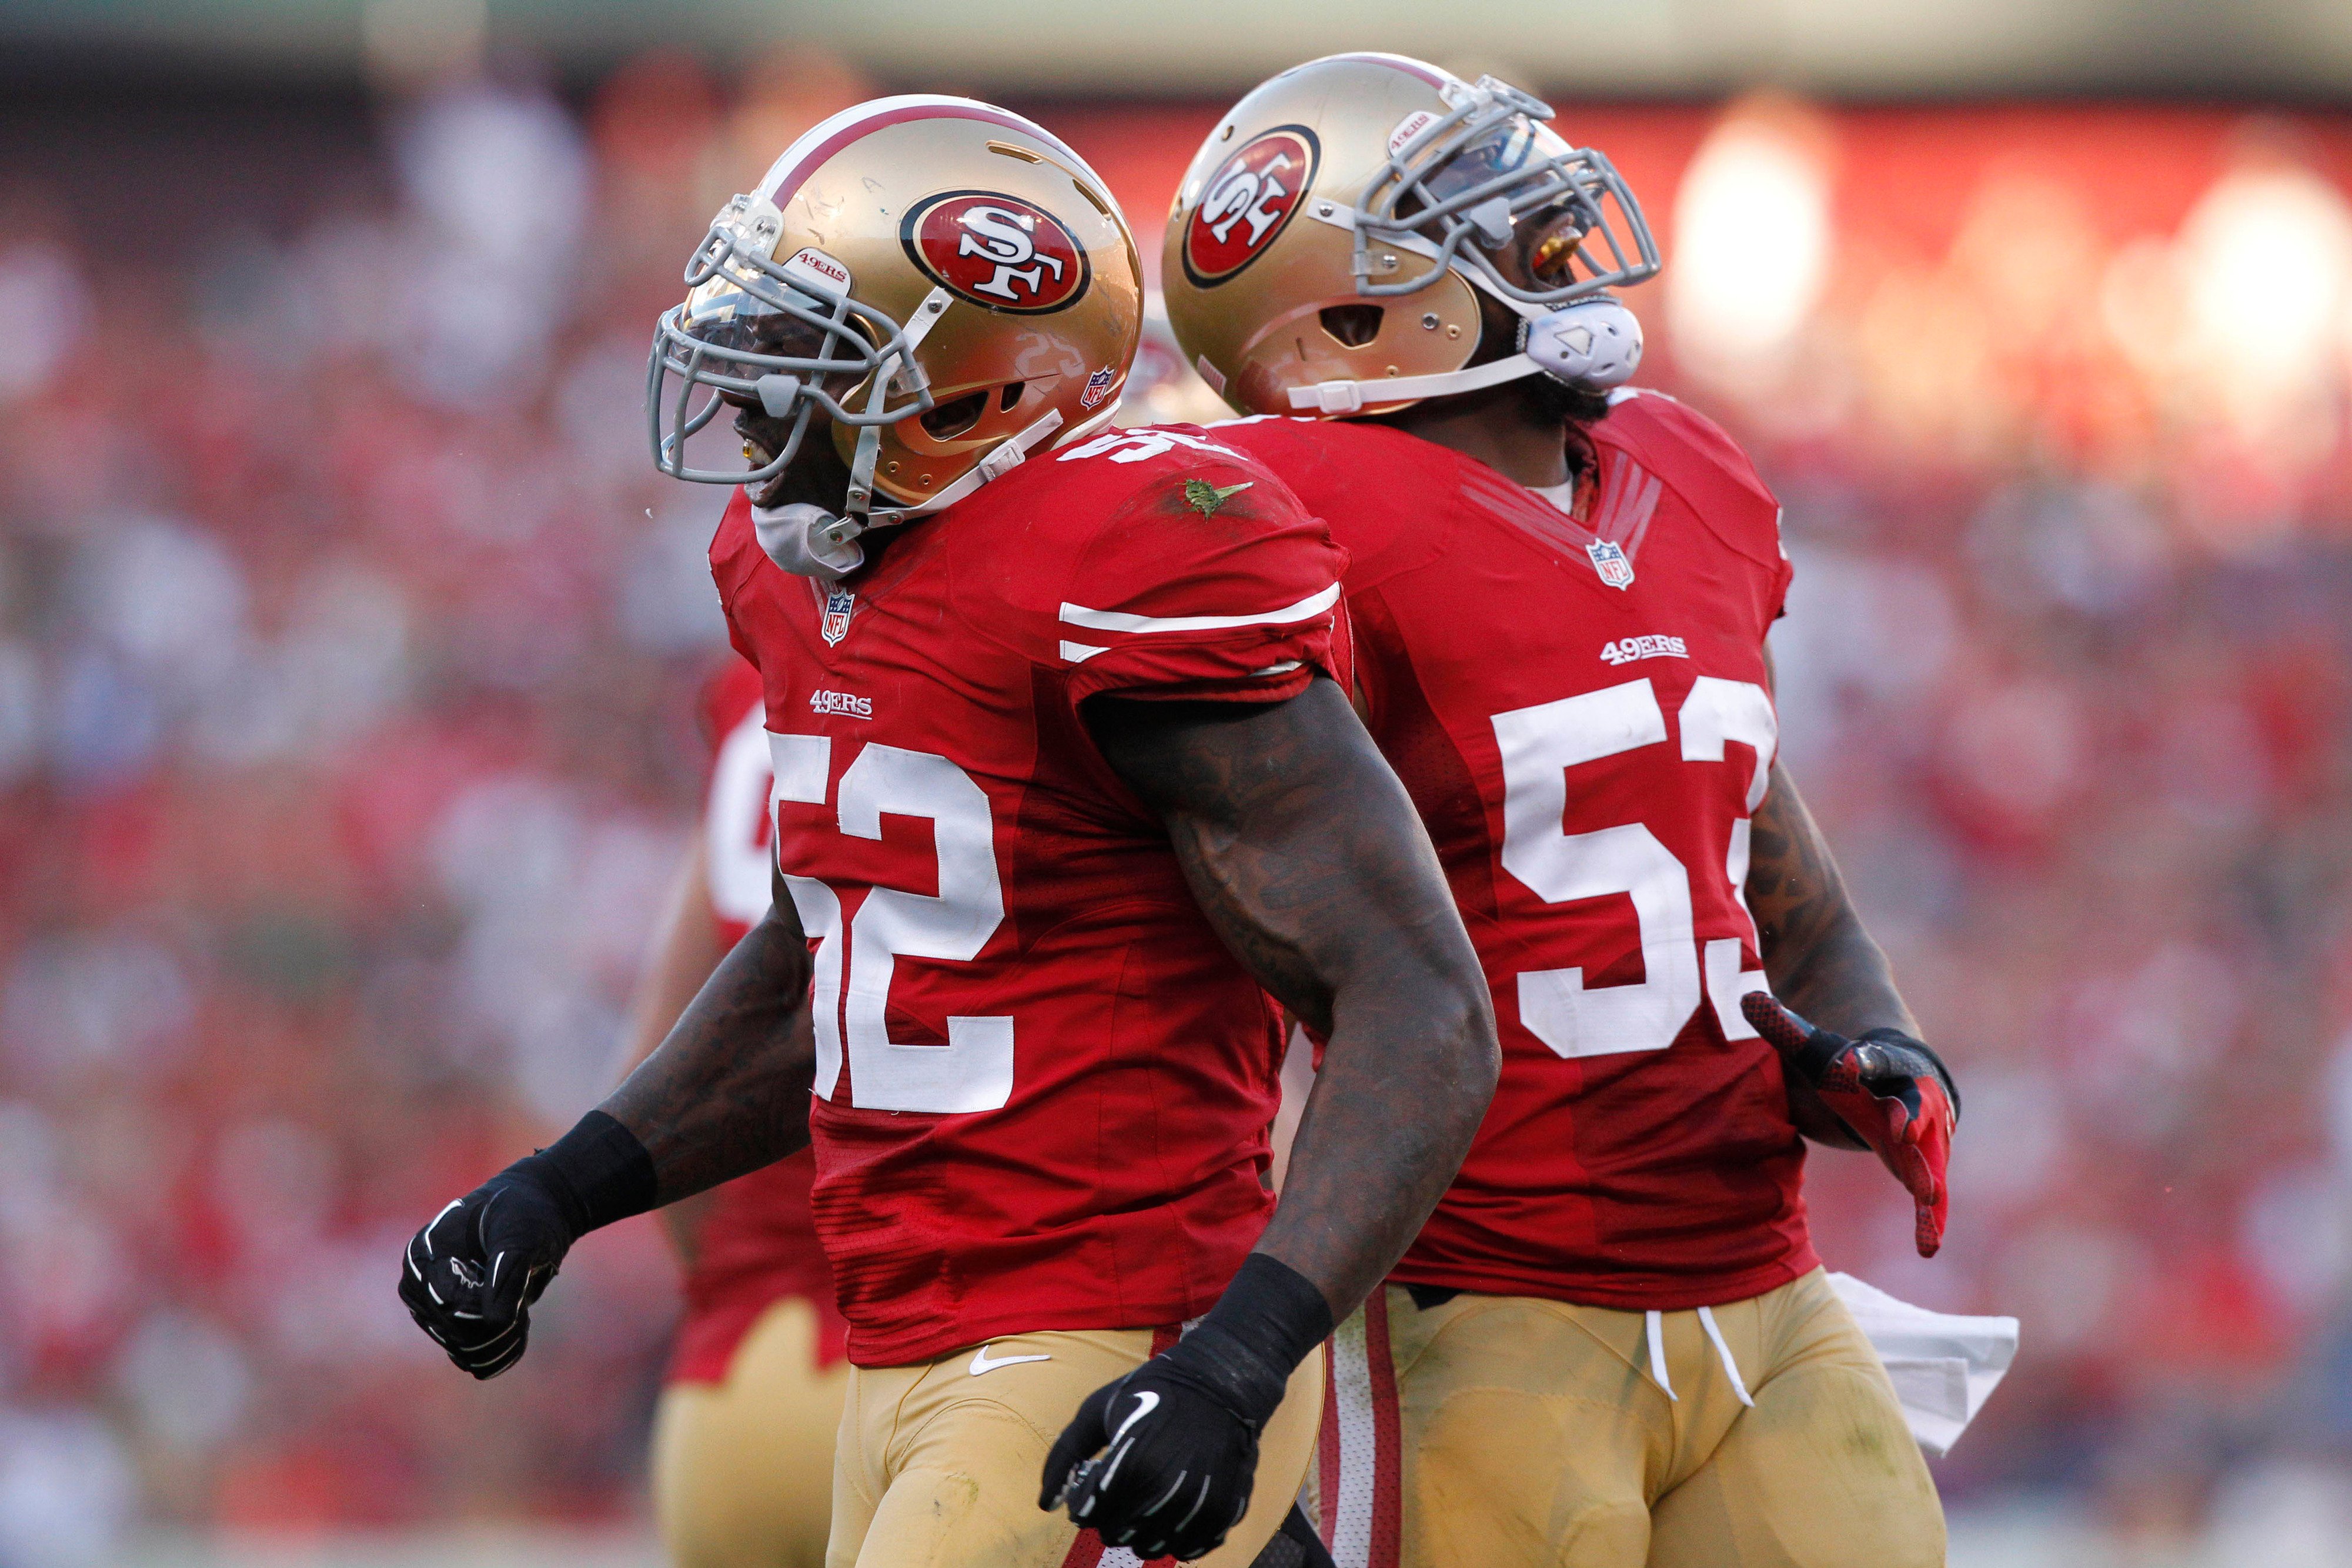 Patrick Willis Wallpapers High Quality Download 4000x2667